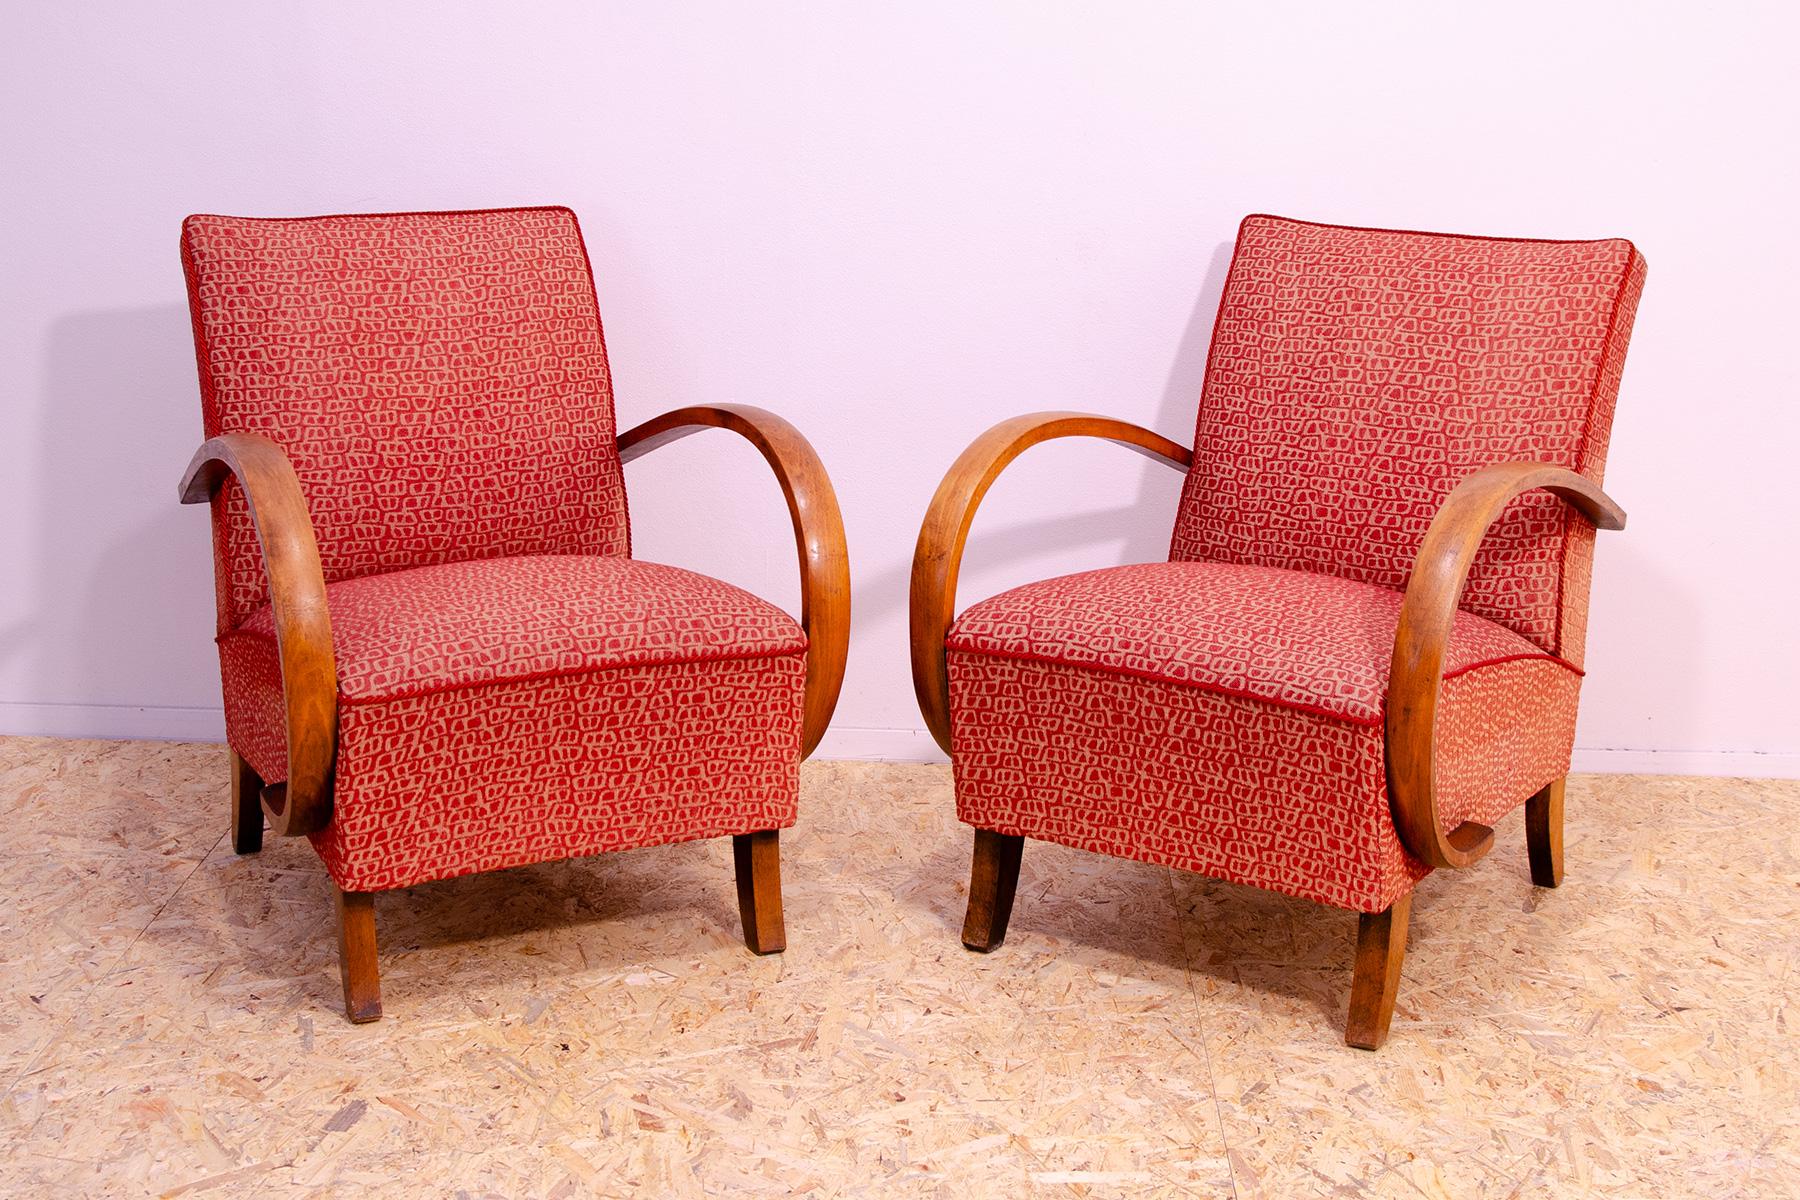 Pair of midcentury bentwood “C” armchairs designed by Jindřich Halabala and produced by UP Závody in the 1950´s. The chairs are stable and comfortable and overall are in good preserved Vintage condition, the fabric shows signs of age and